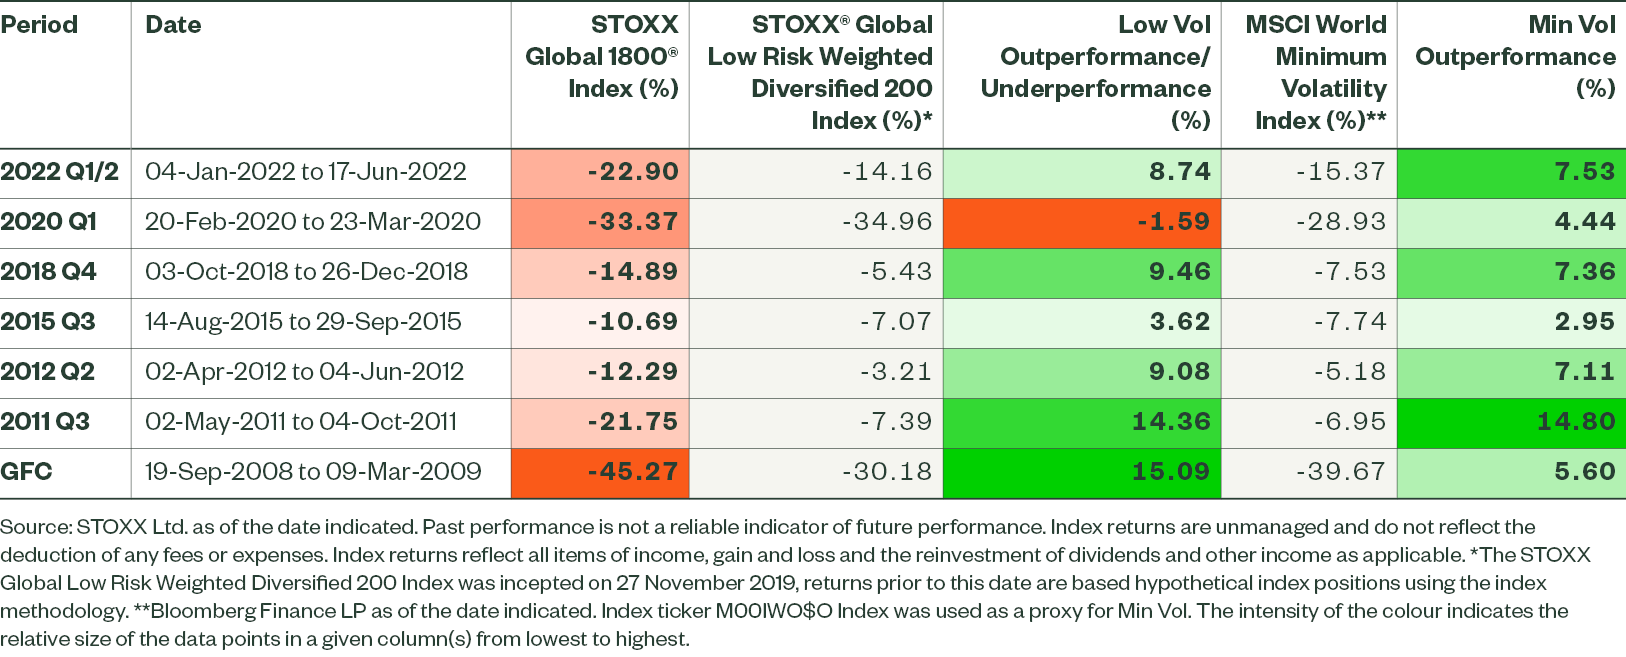 Figure 2: Global Low Volatility Performance in Major Market Sell-offs